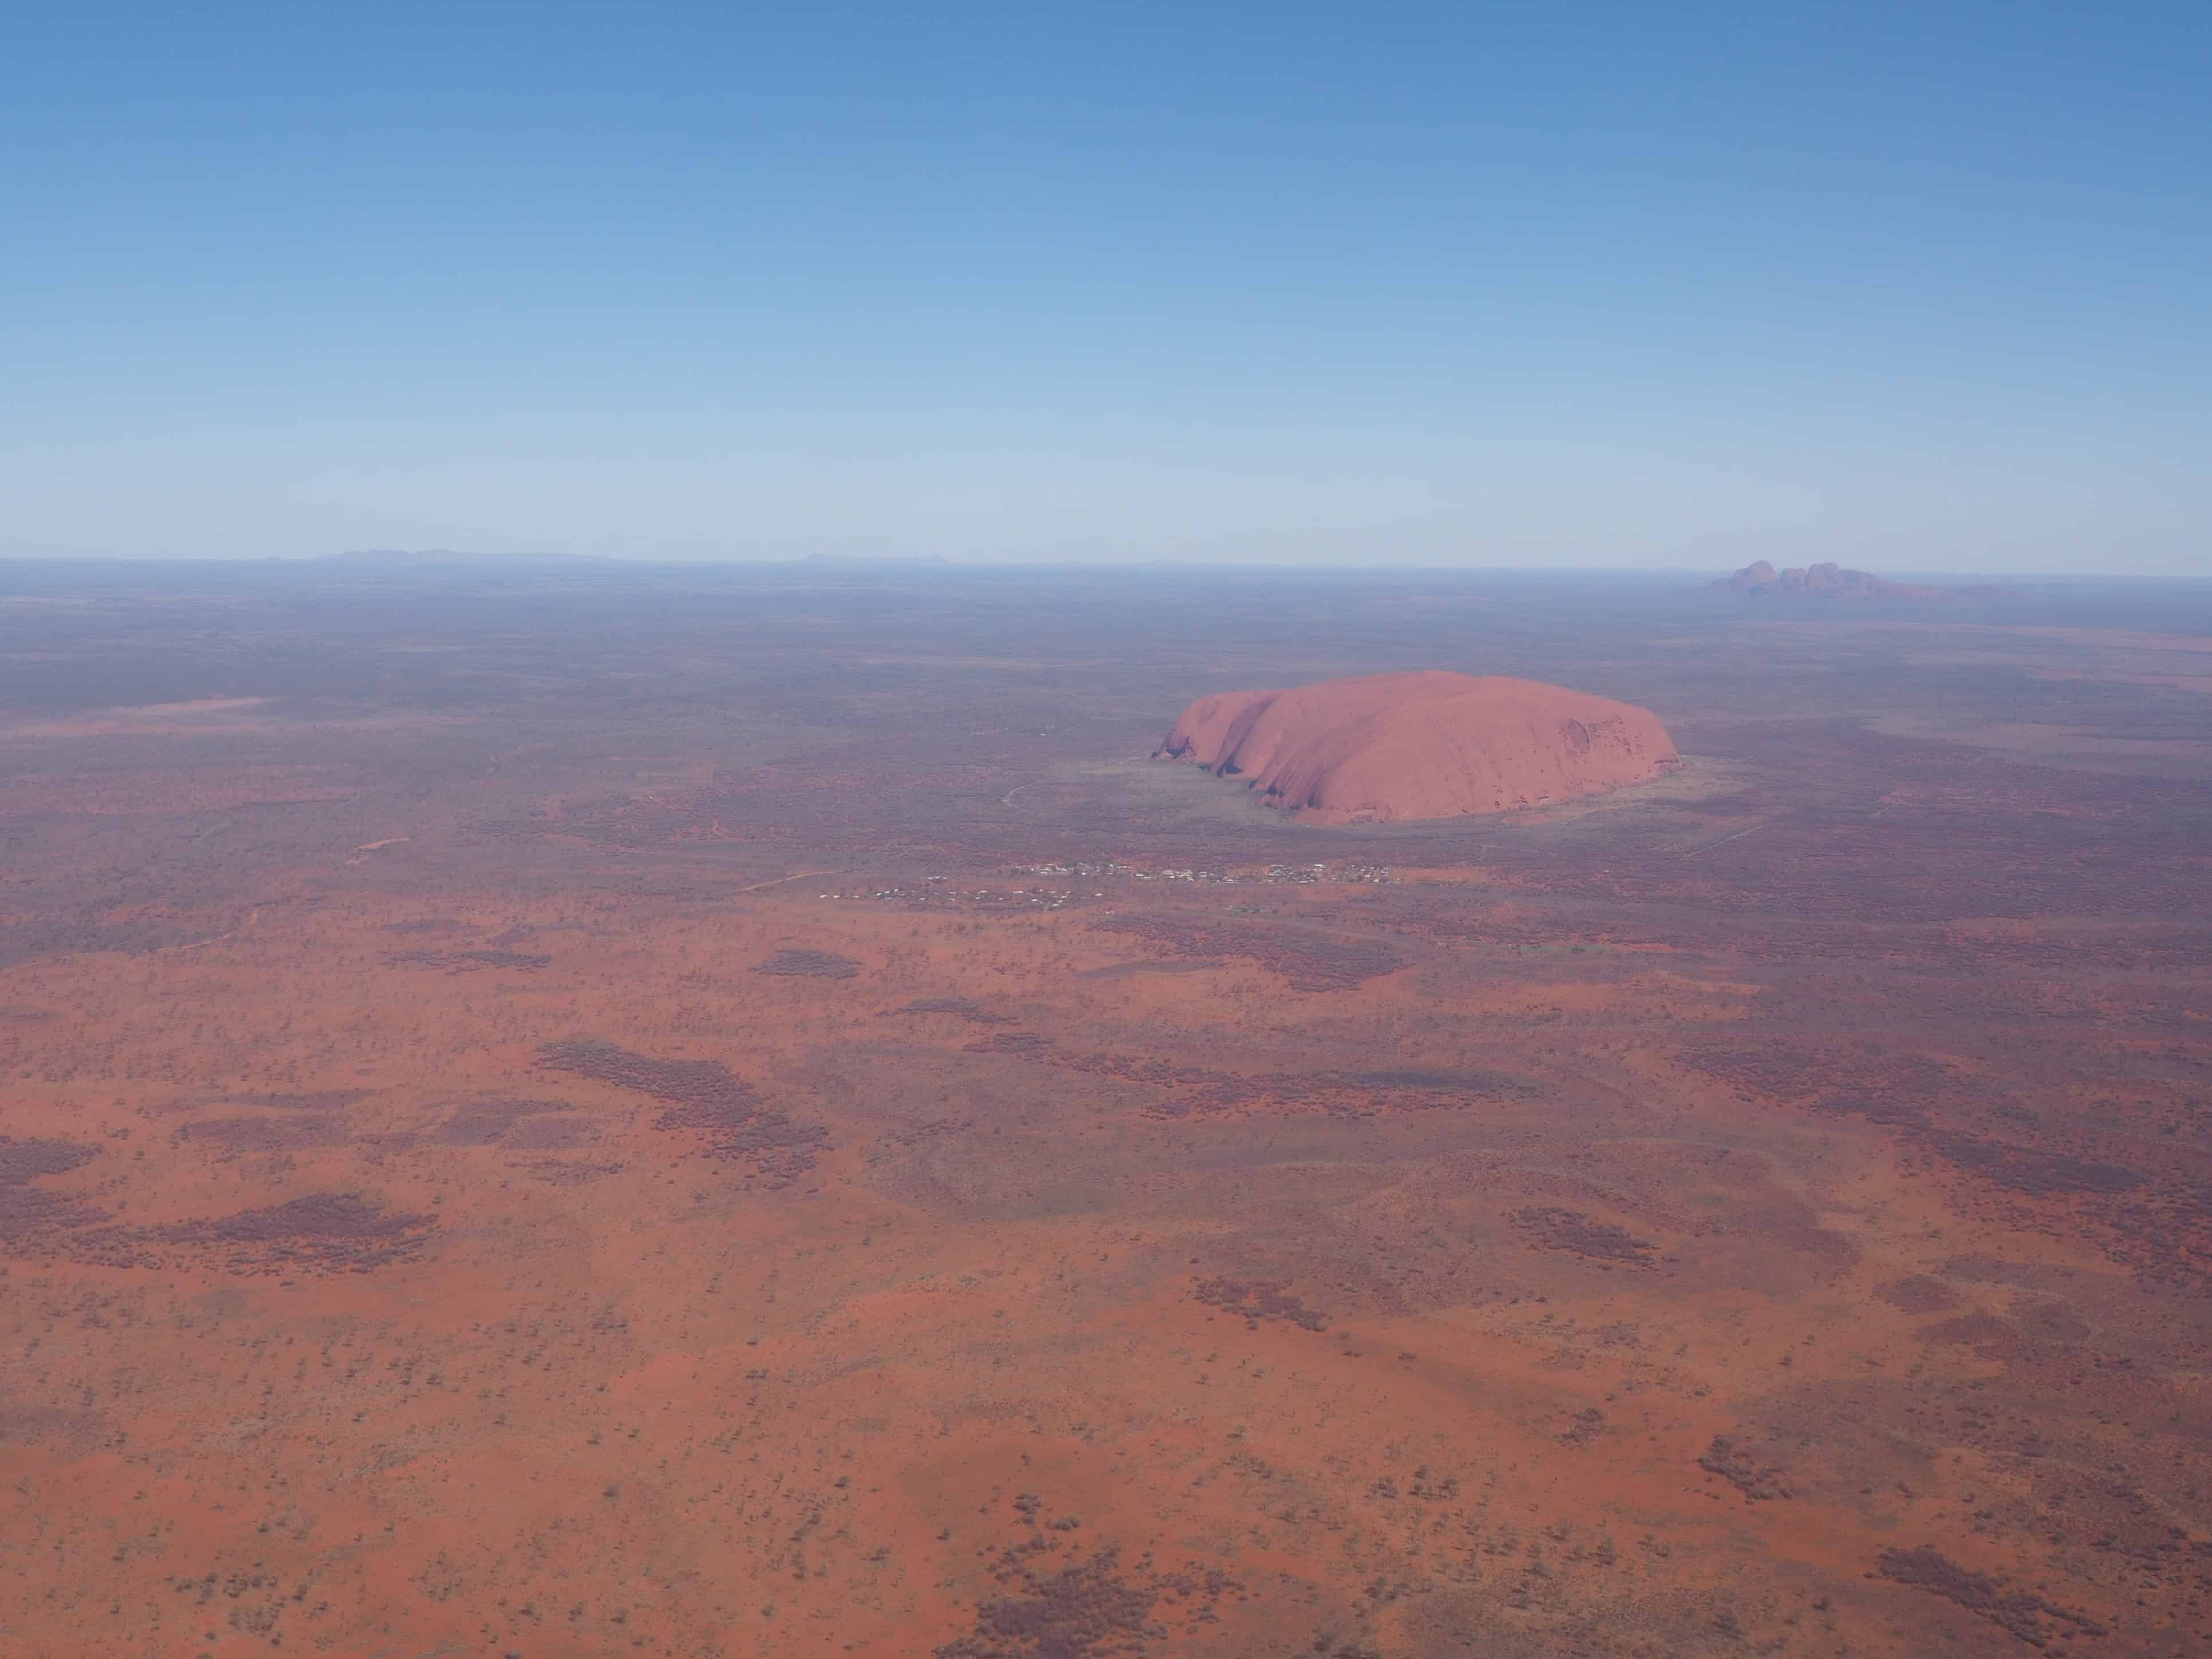 A rippled red sand dune against a clear blue sky, taken near Uluru in  central Australia Stock Photo